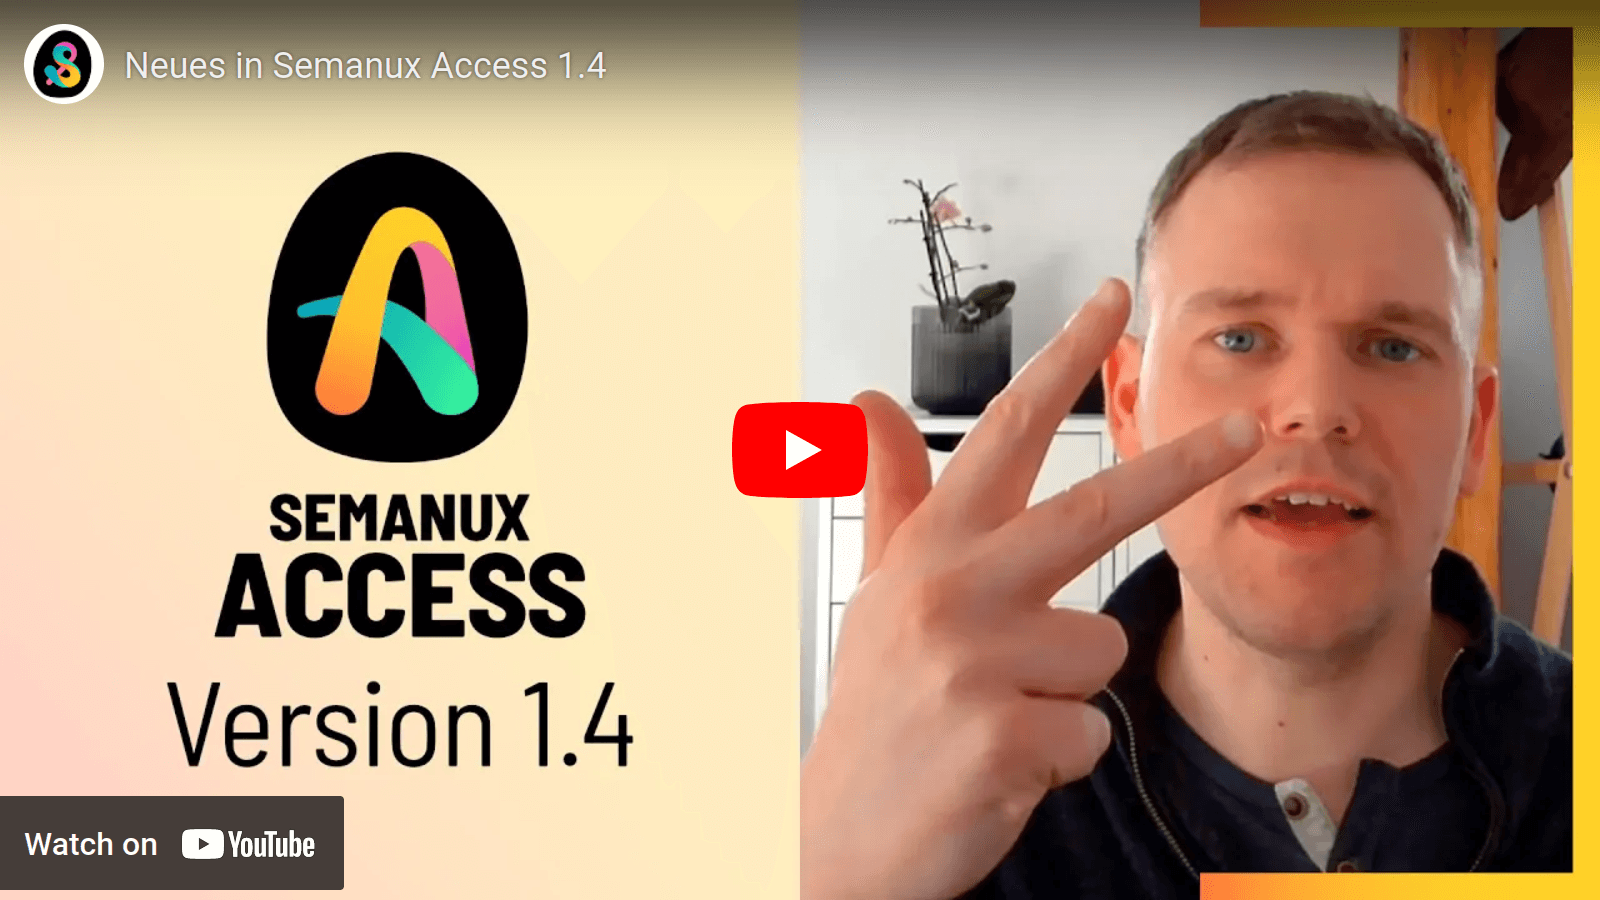 YouTube-Video „Neues in Semanux Access 1.4 “